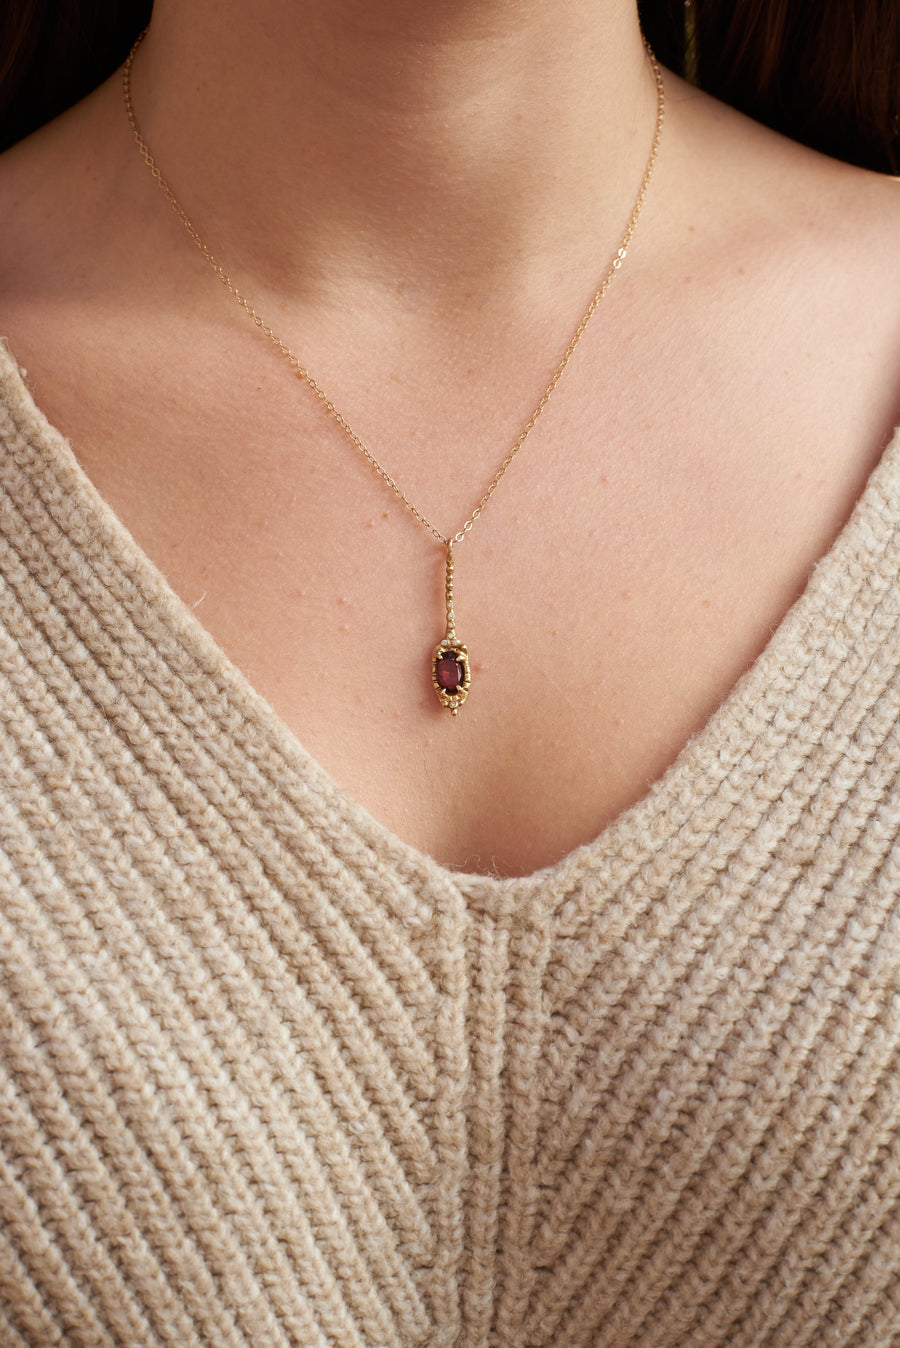 The neck and chest of a light skinned person wearing an oatmeal colored sweater with a V neck and a gold chain with a pendant featuring a rhodolite garnet 